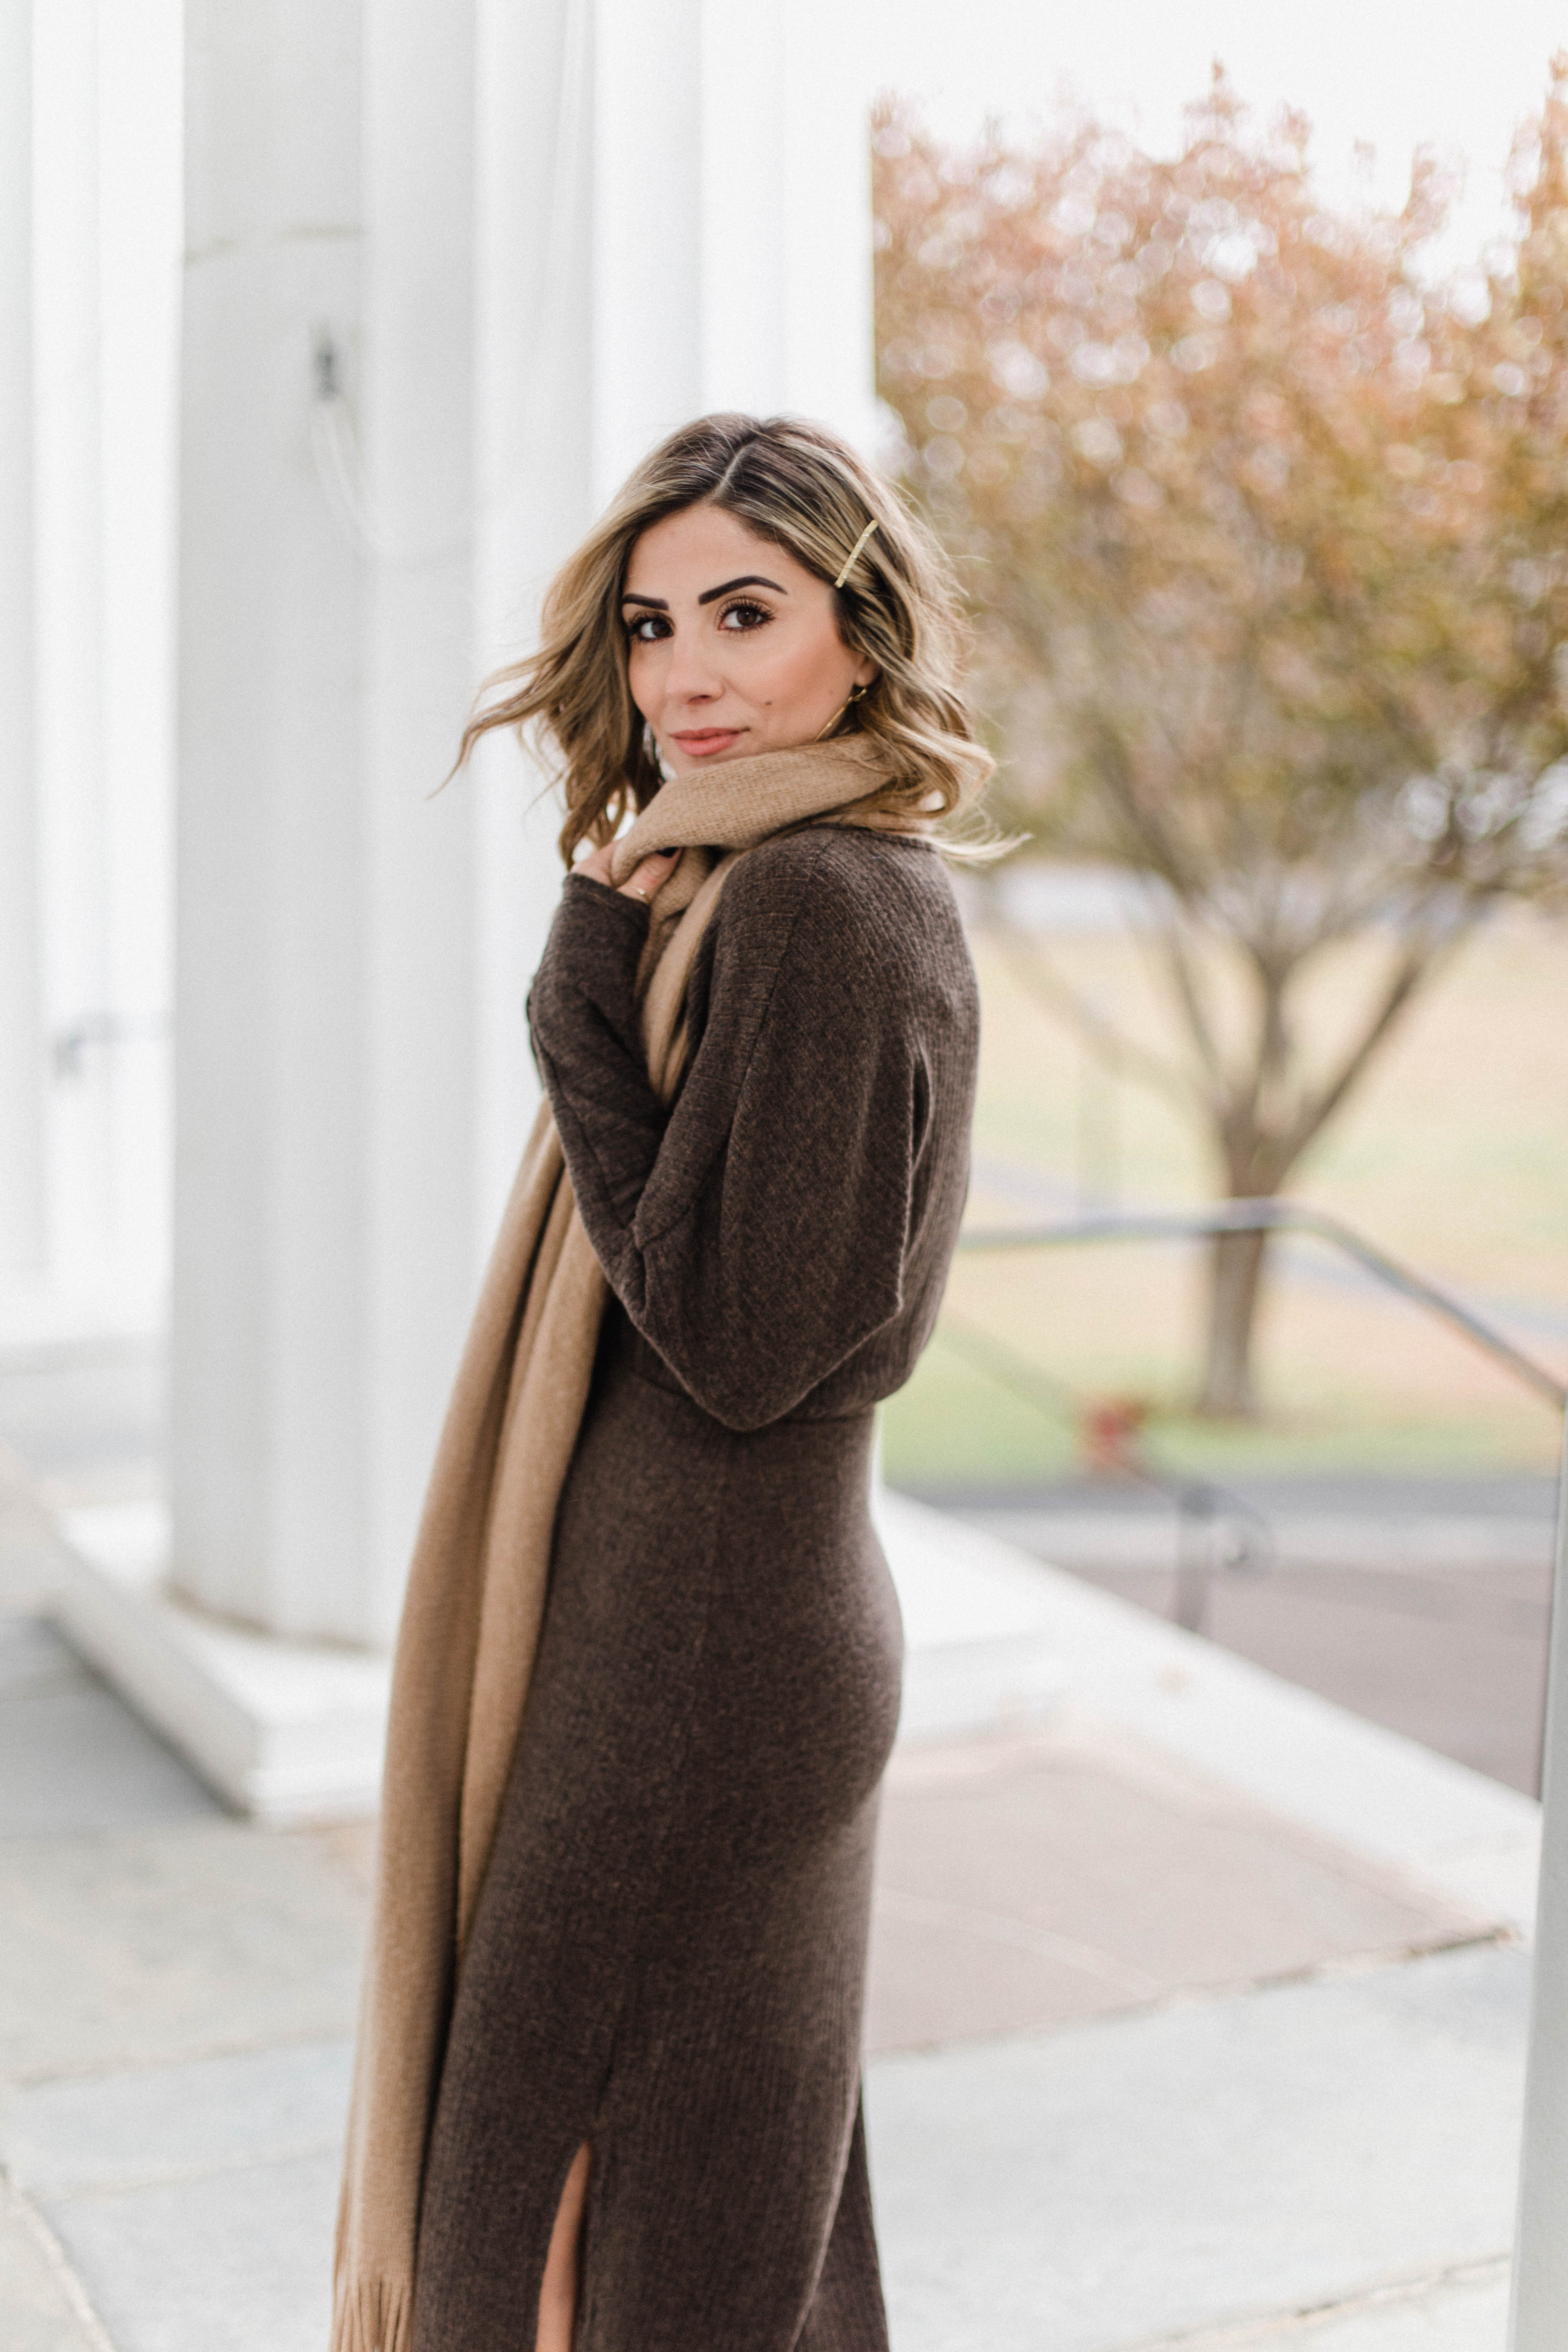 Connecticut life and style blogger Lauren McBride shares two Easy Holiday Style looks featuring a dressy and casual outfit with items from Nordstrom.